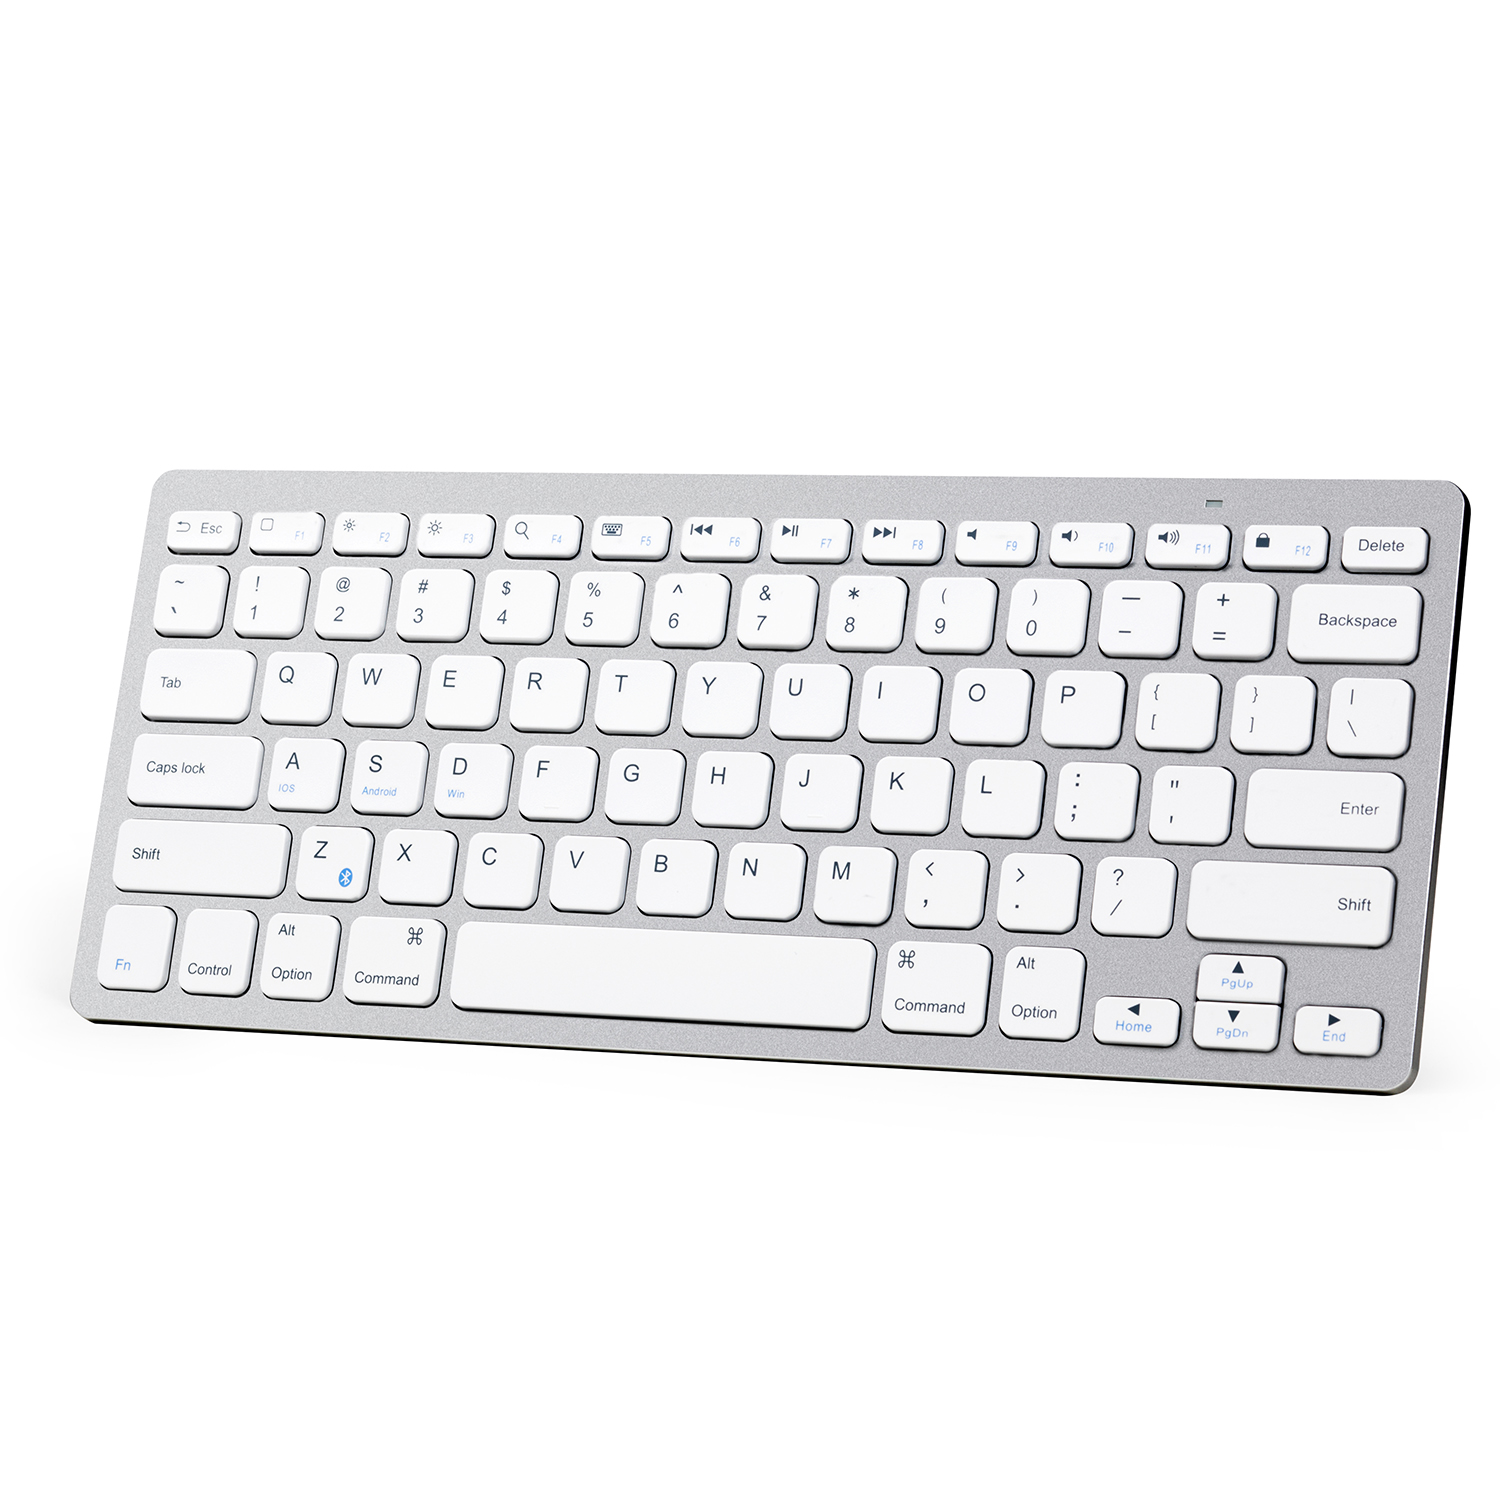 Anker Ultra Compact Slim Profile Wireless Bluetooth Keyboard for iOS, Android, Windows and Mac - image 1 of 6